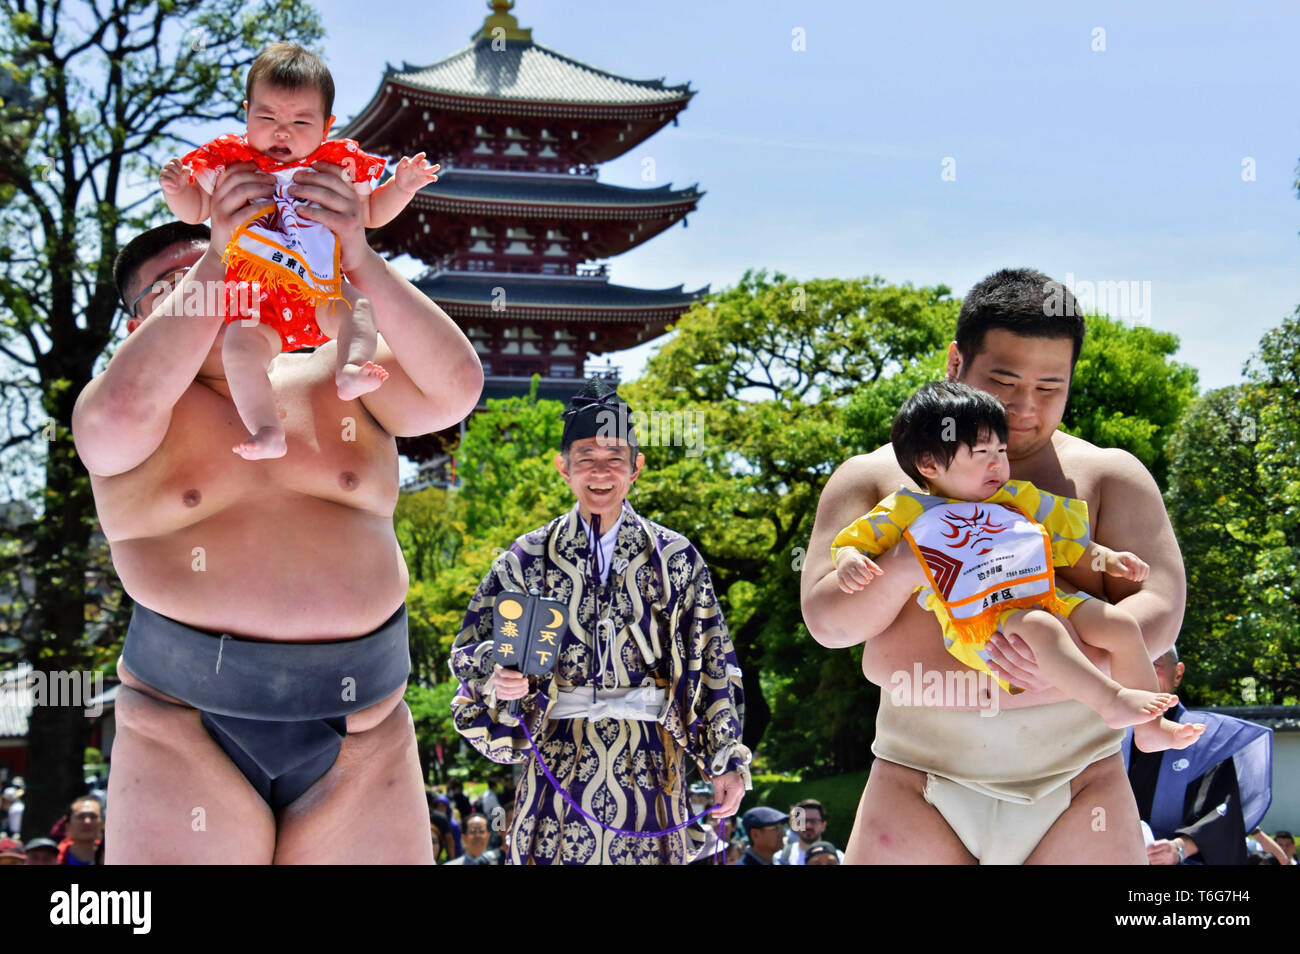 Sumo wrestlers hold up crying babies during a "Baby-cry Sumo" event at the Sensoji Temple on April 28, 2019 in Tokyo, Japan. Japanese parents believe that sumo wrestlers can help make babies cry out a wish to grow up with good health. Stock Photo